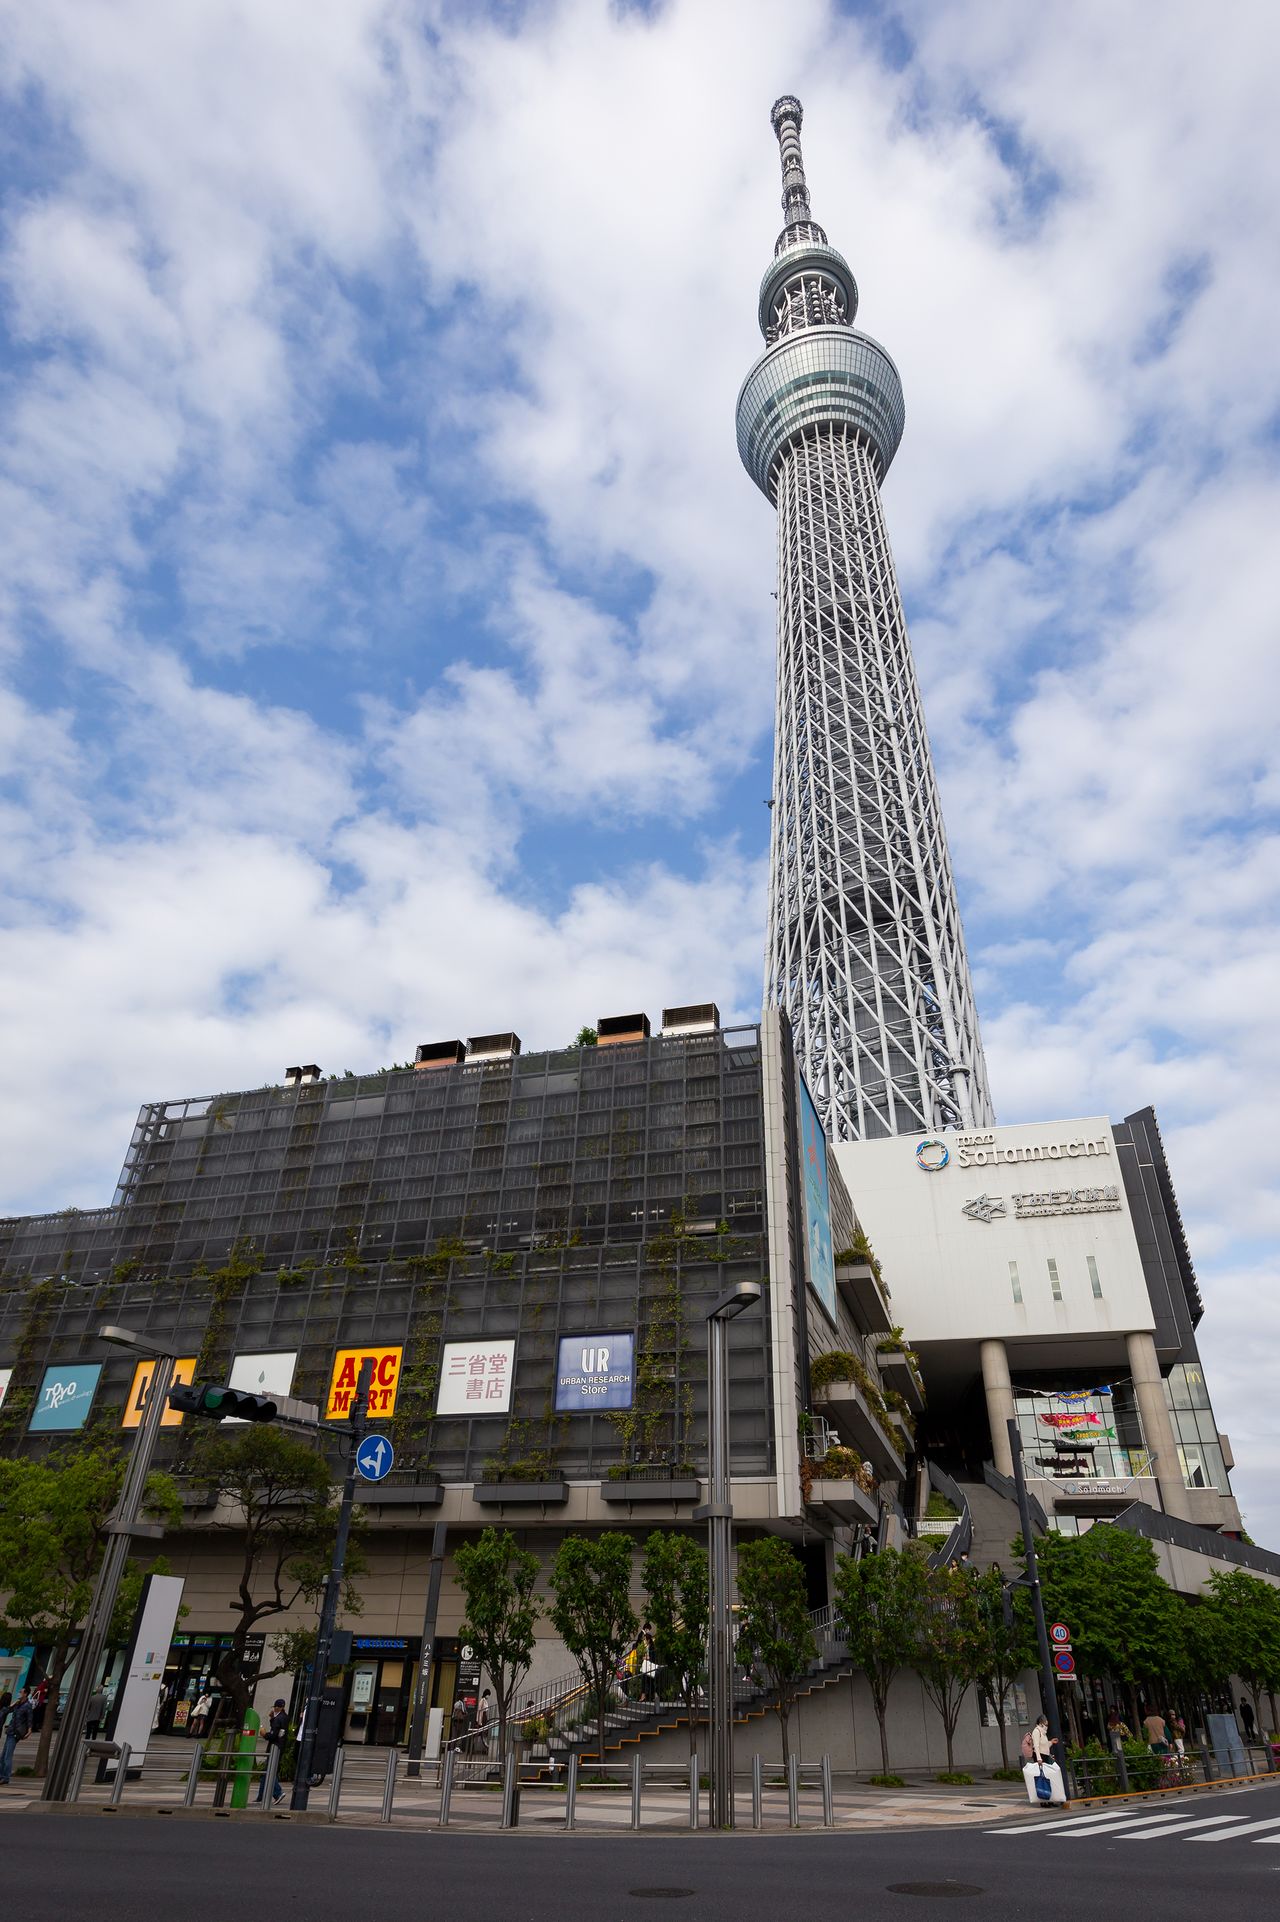 The tower’s “Skytree White” shade was inspired by the traditional Japanese hue aijiro—the palest possible color achieved through indigo dyeing.